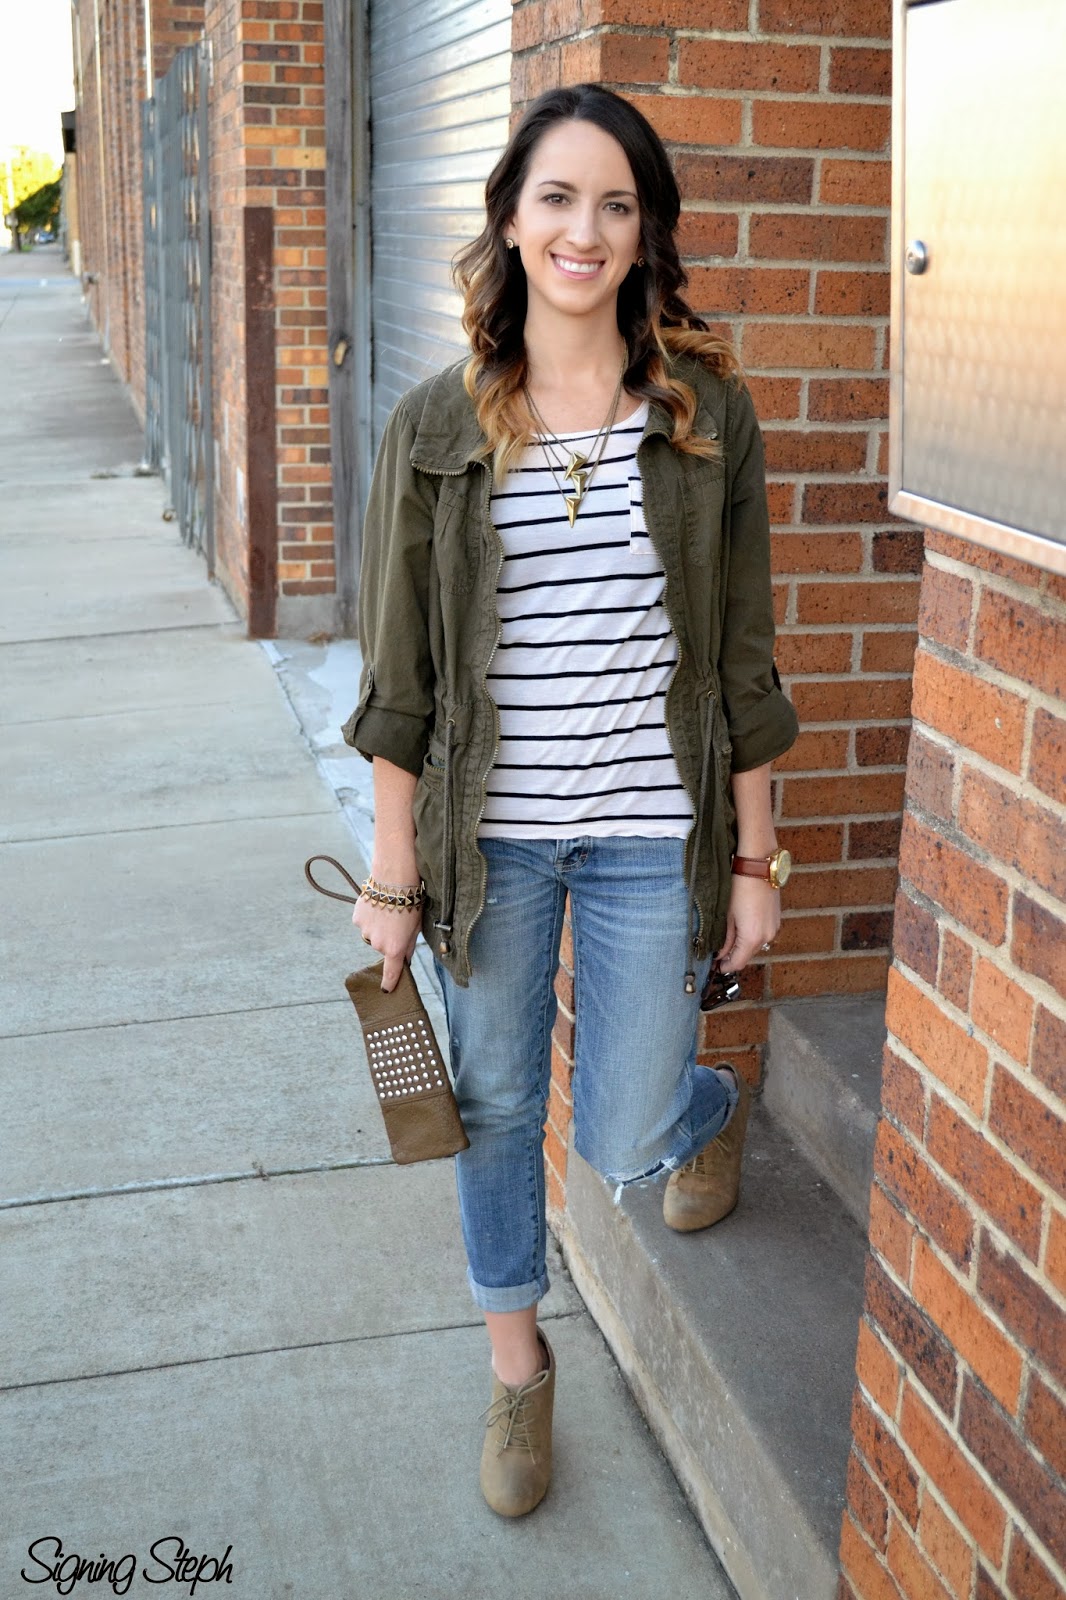 Boyfriend Jeans and Stripes | Signing Steph